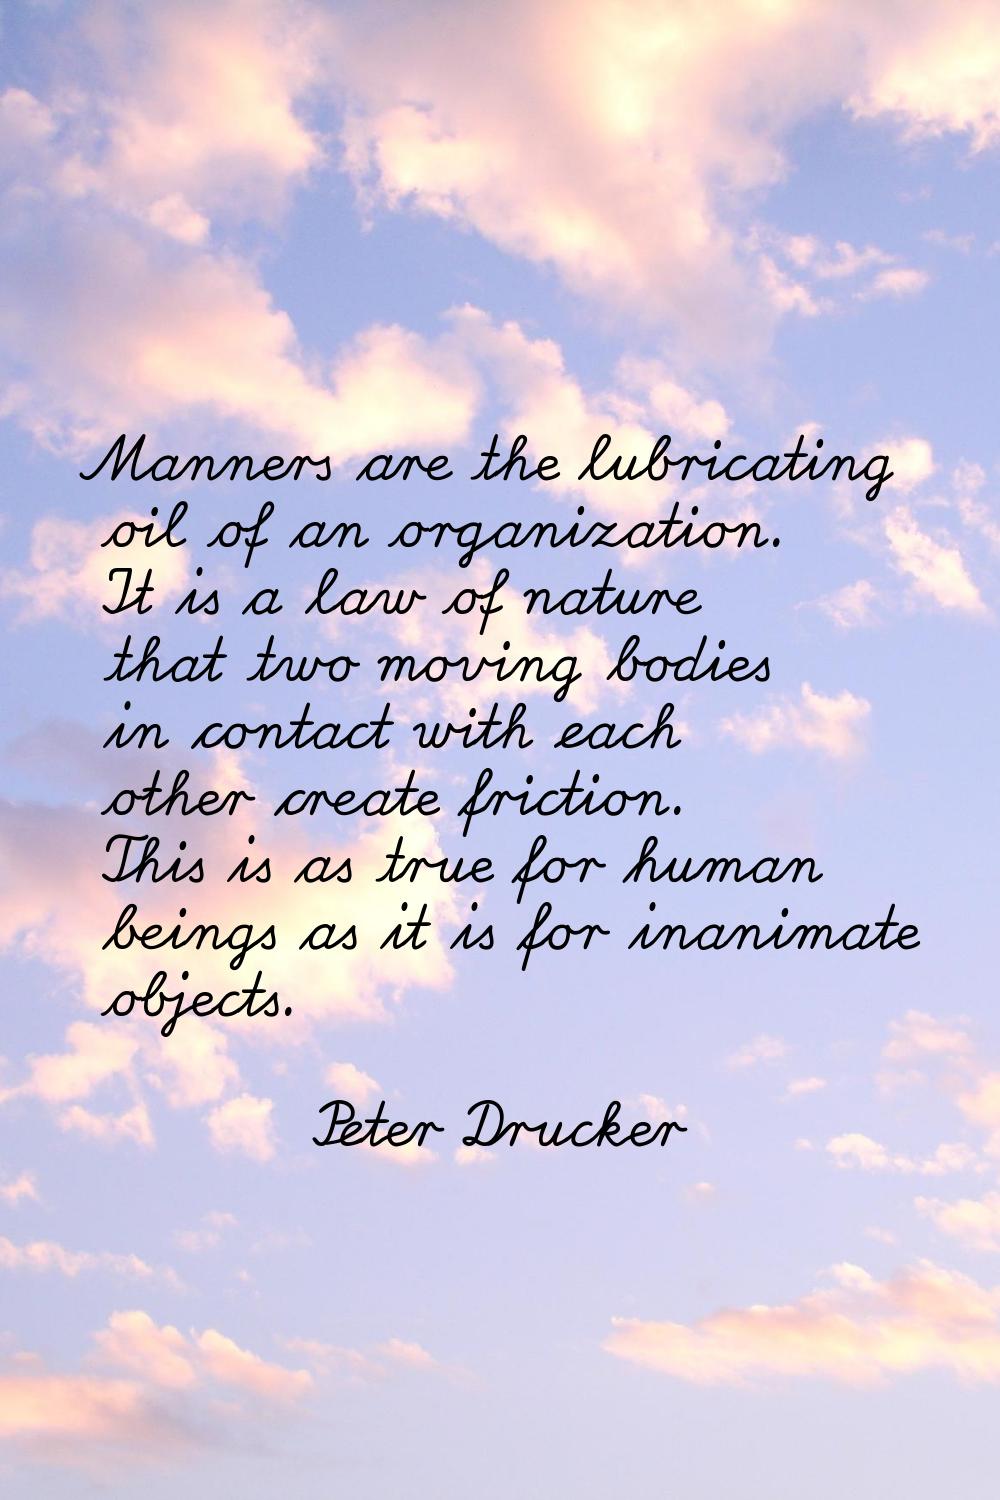 Manners are the lubricating oil of an organization. It is a law of nature that two moving bodies in